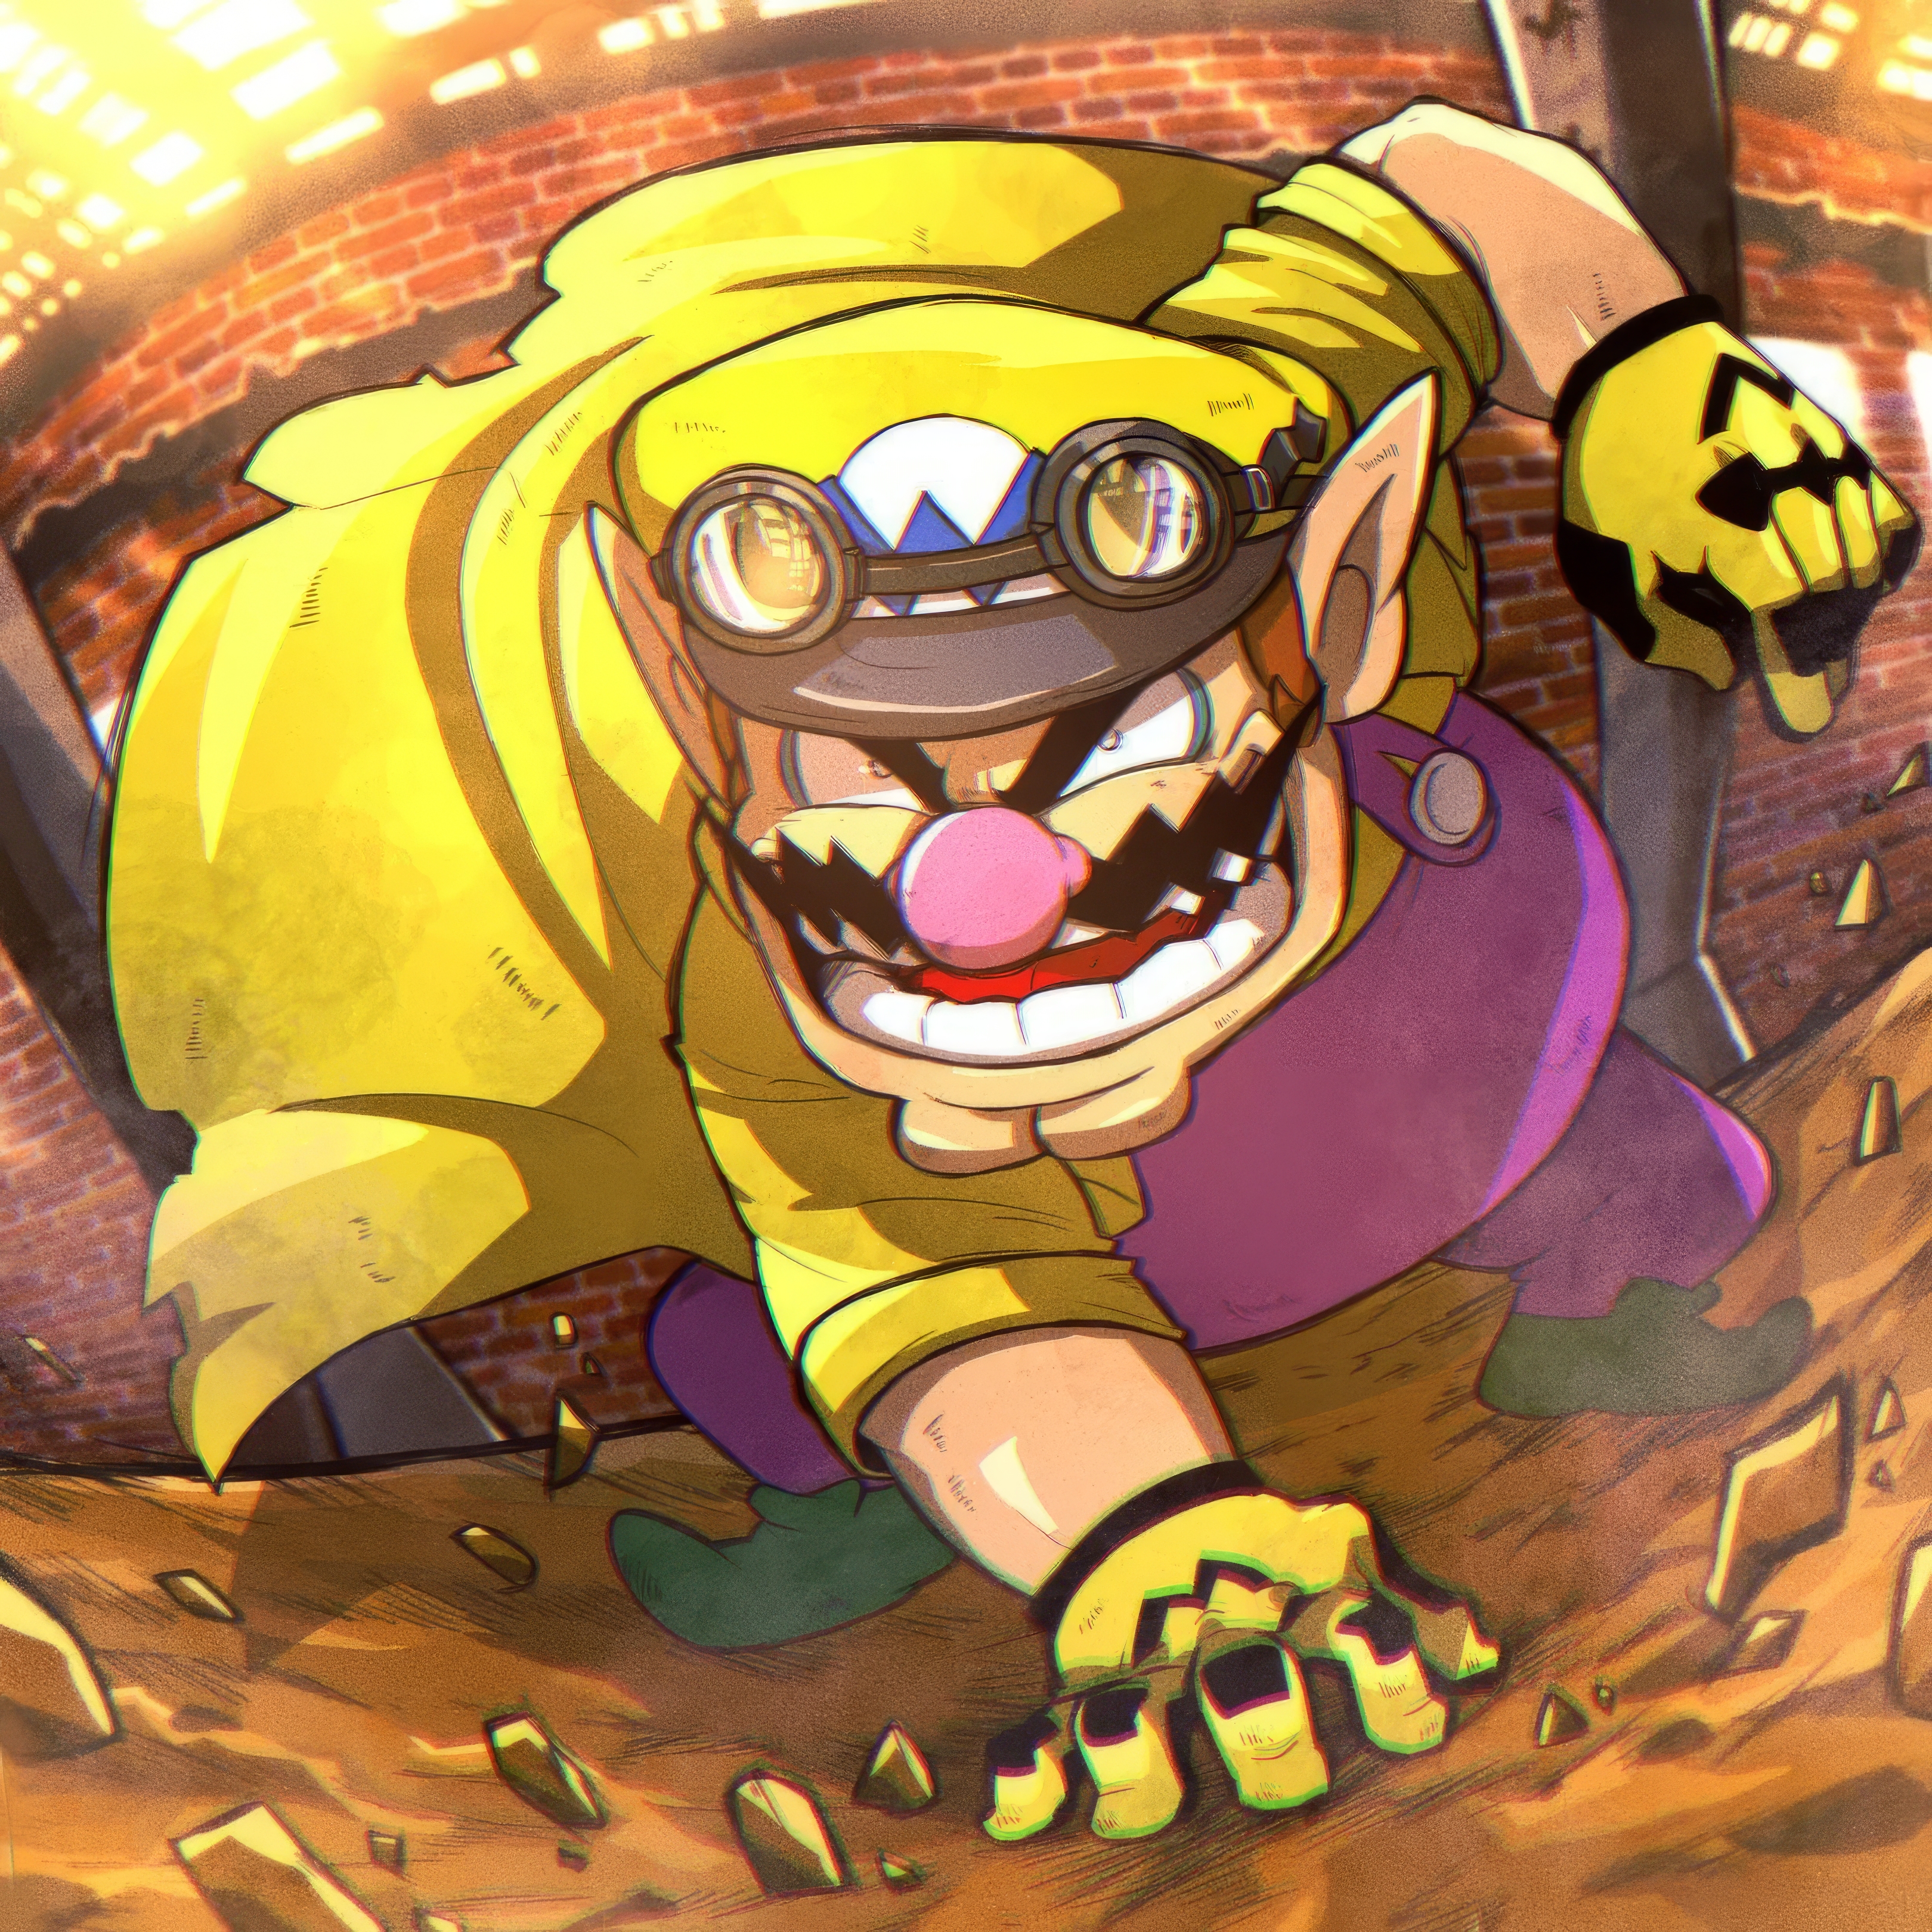 General 3240x3240 Nintendo Wario drawn scary face moustache yellow gloves video games video game characters